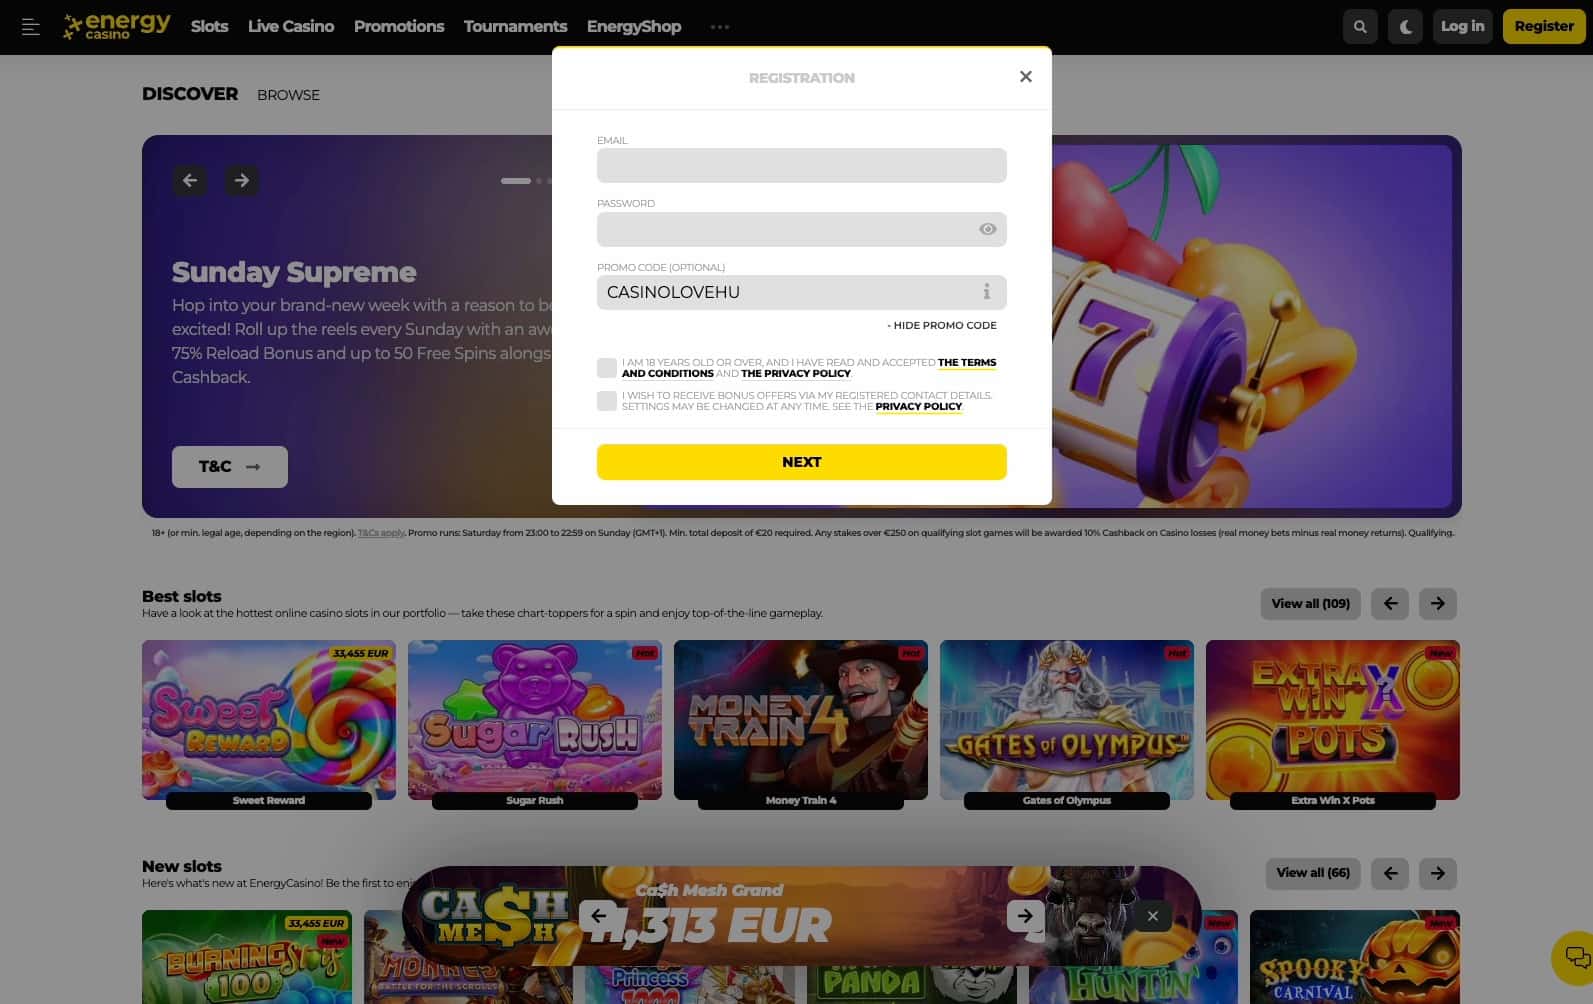 First step of registration at Energy Casino with the CASINOLOVEHU promo code applied